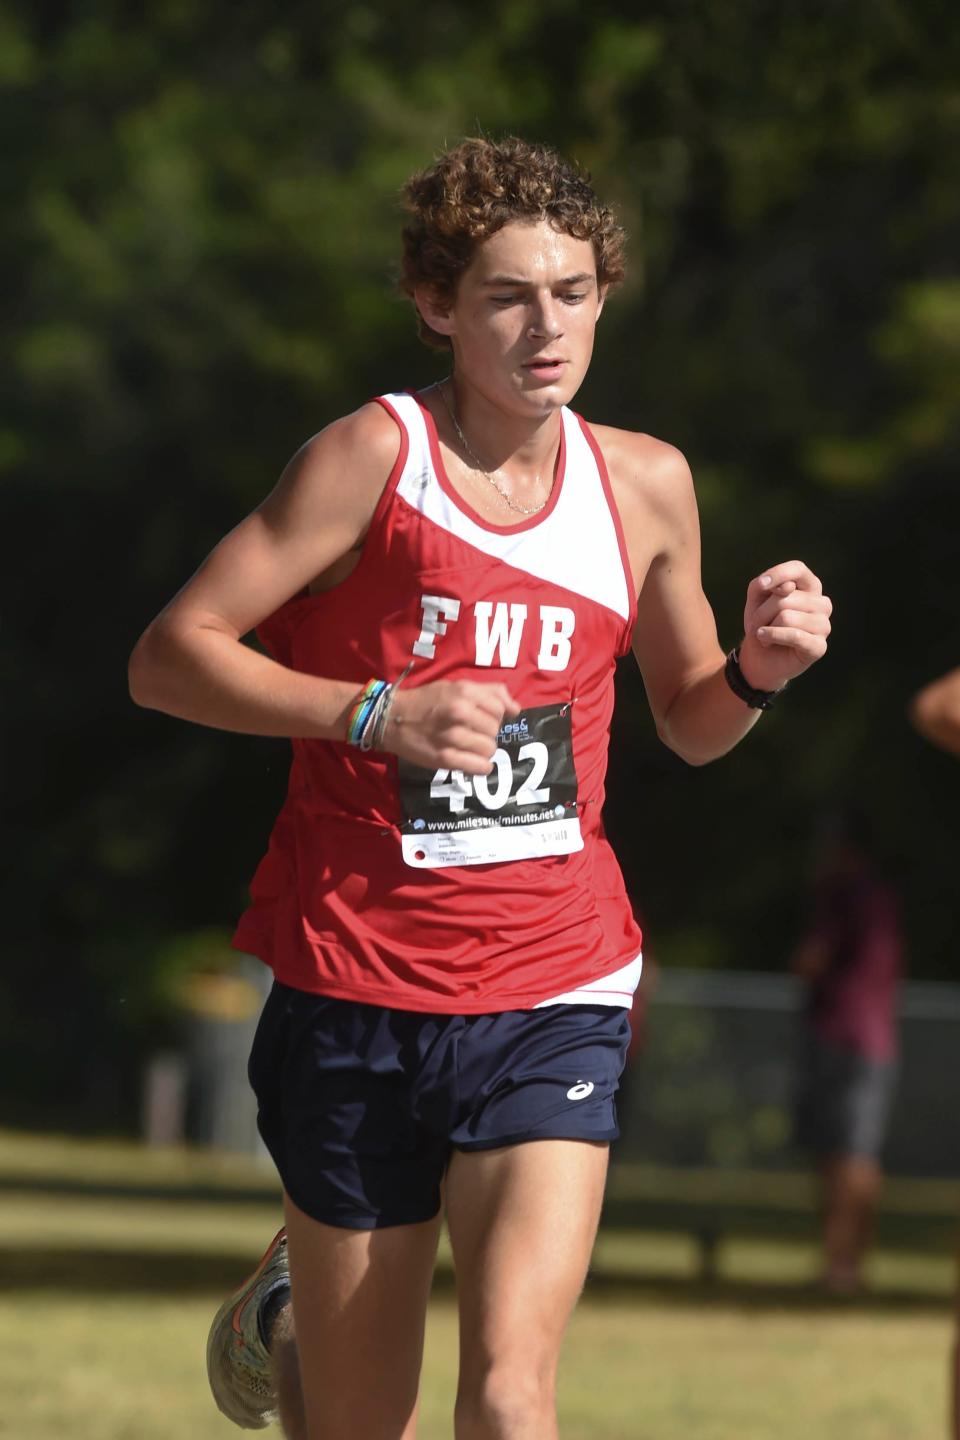 Fort Walton Beach High School's Grant Chastain took second place in the varsity boys division of the Okaloosa County Cross Country Championships held Thursday, Oct. 13, 2022 at the Howard Hill Soccer Complex in Niceville.